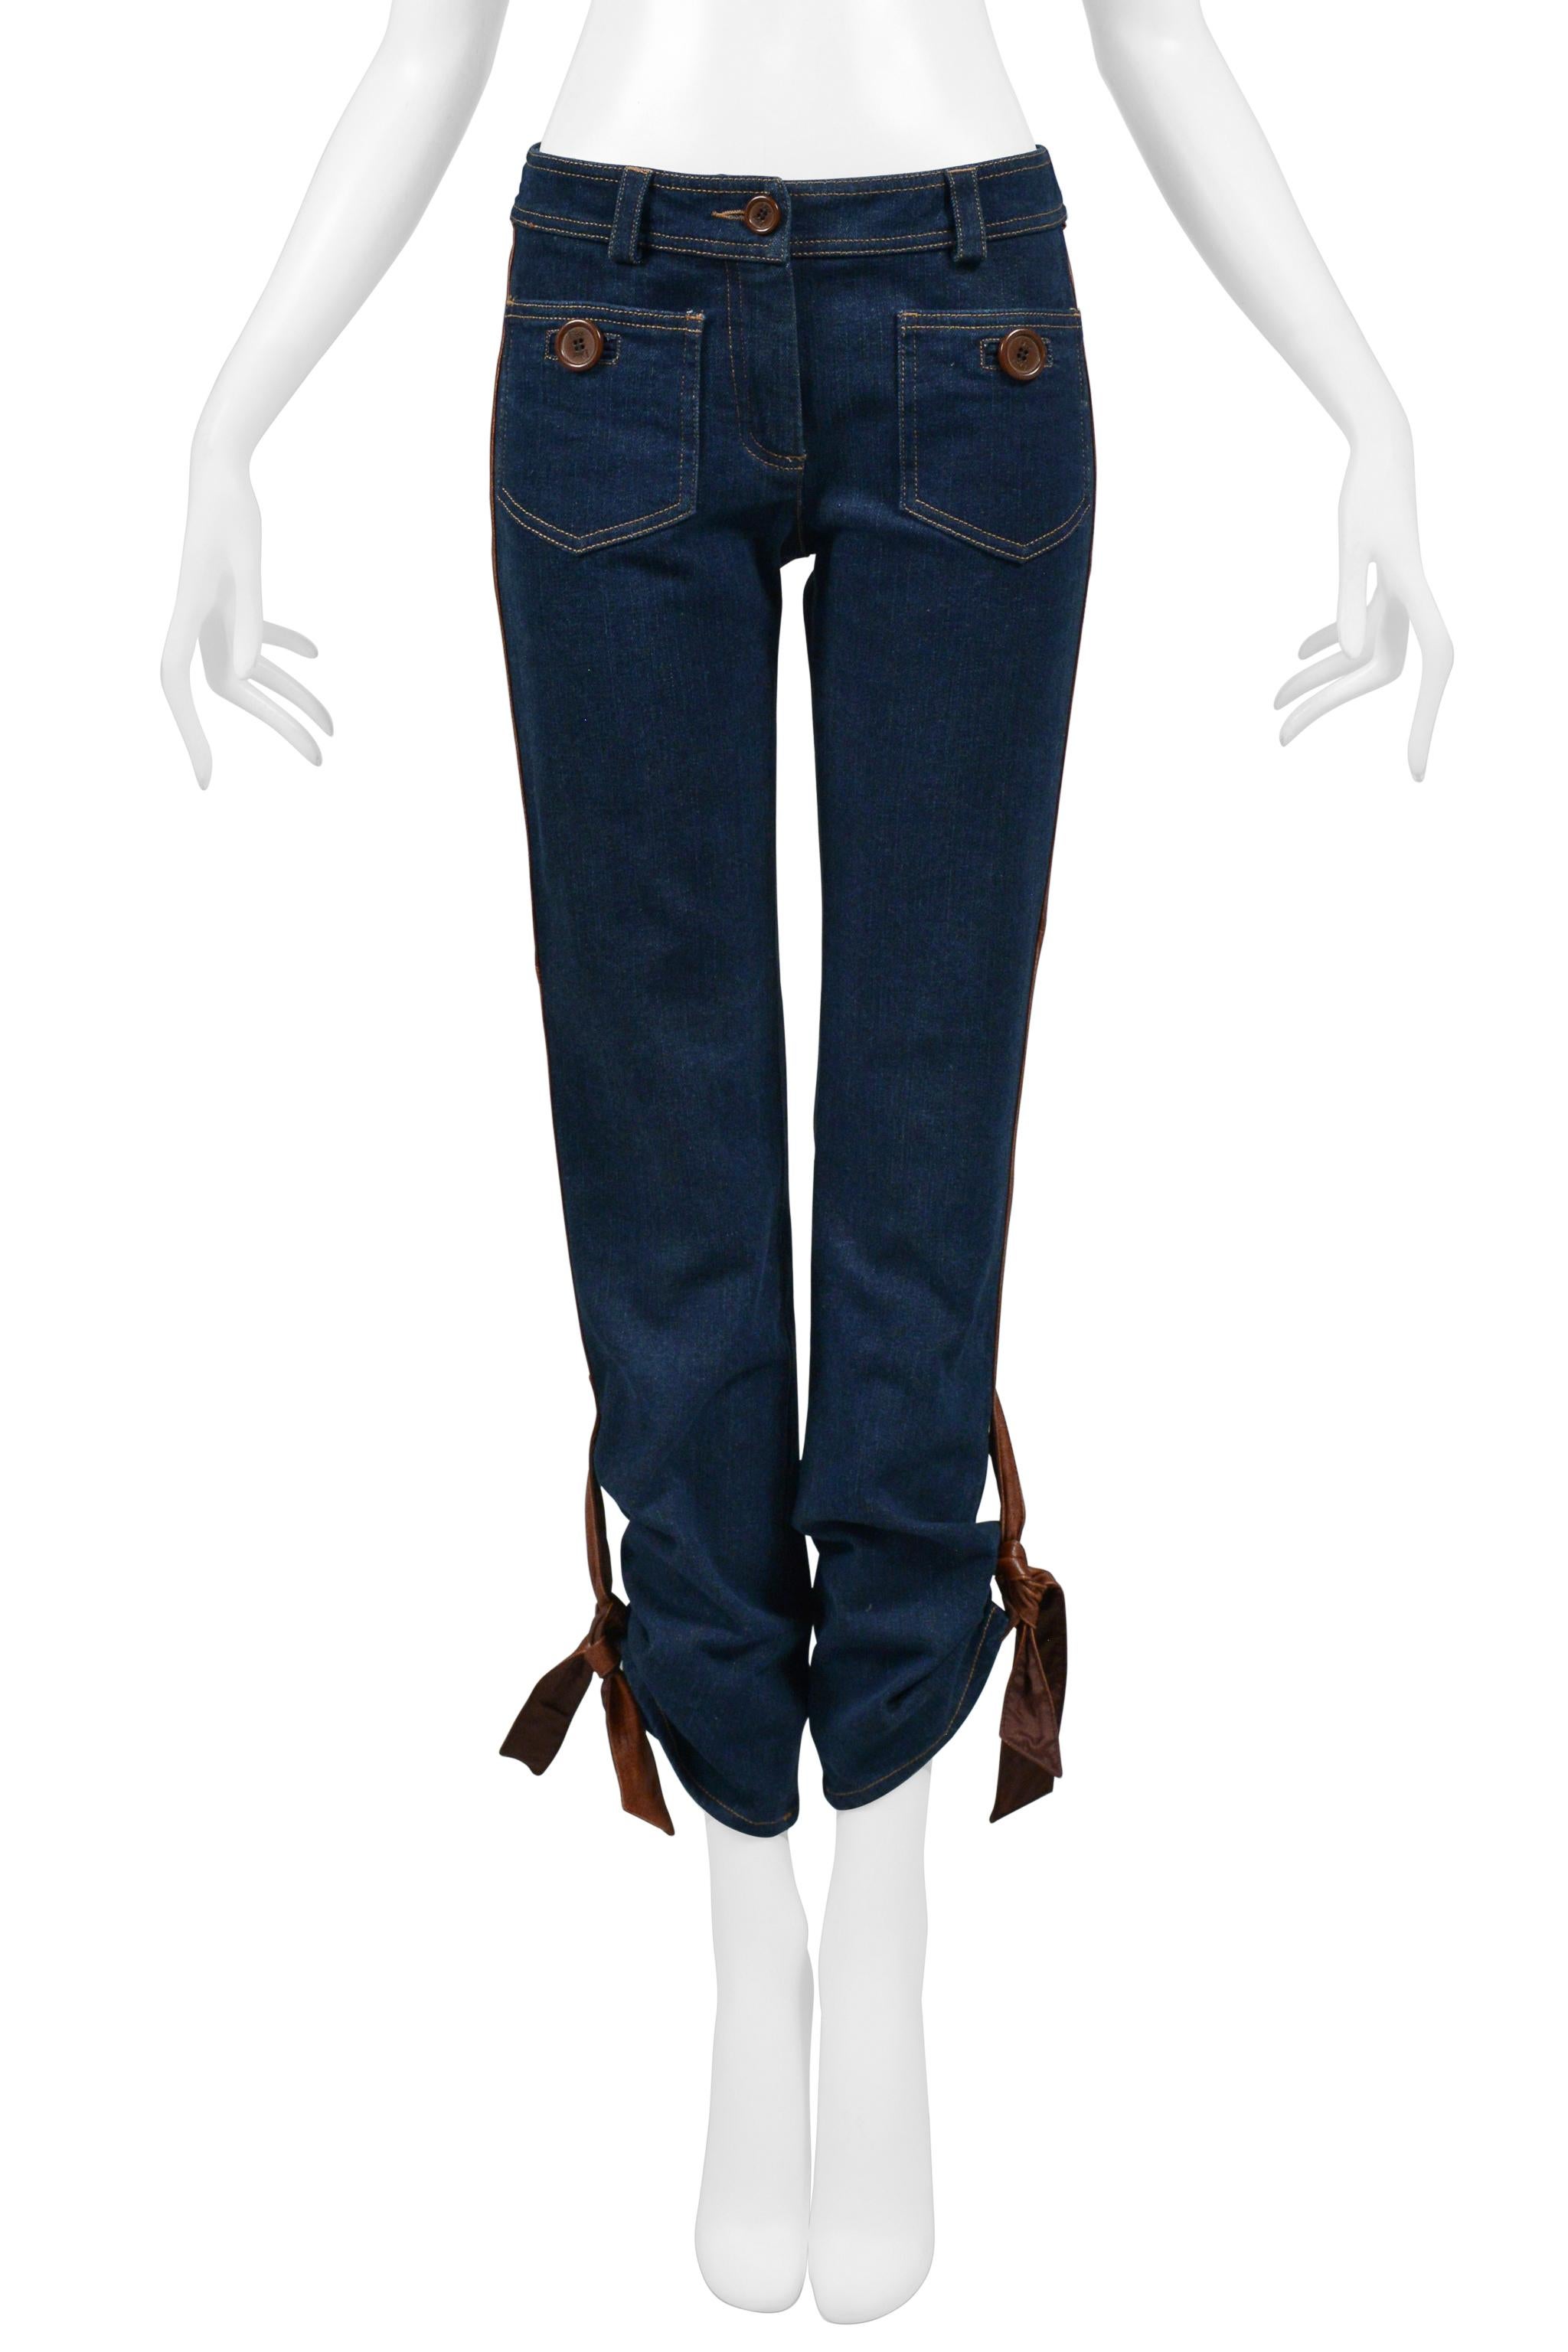 Christian Dior Blue Denim Jeans With Leather Trim & Ties 2005 For Sale 4